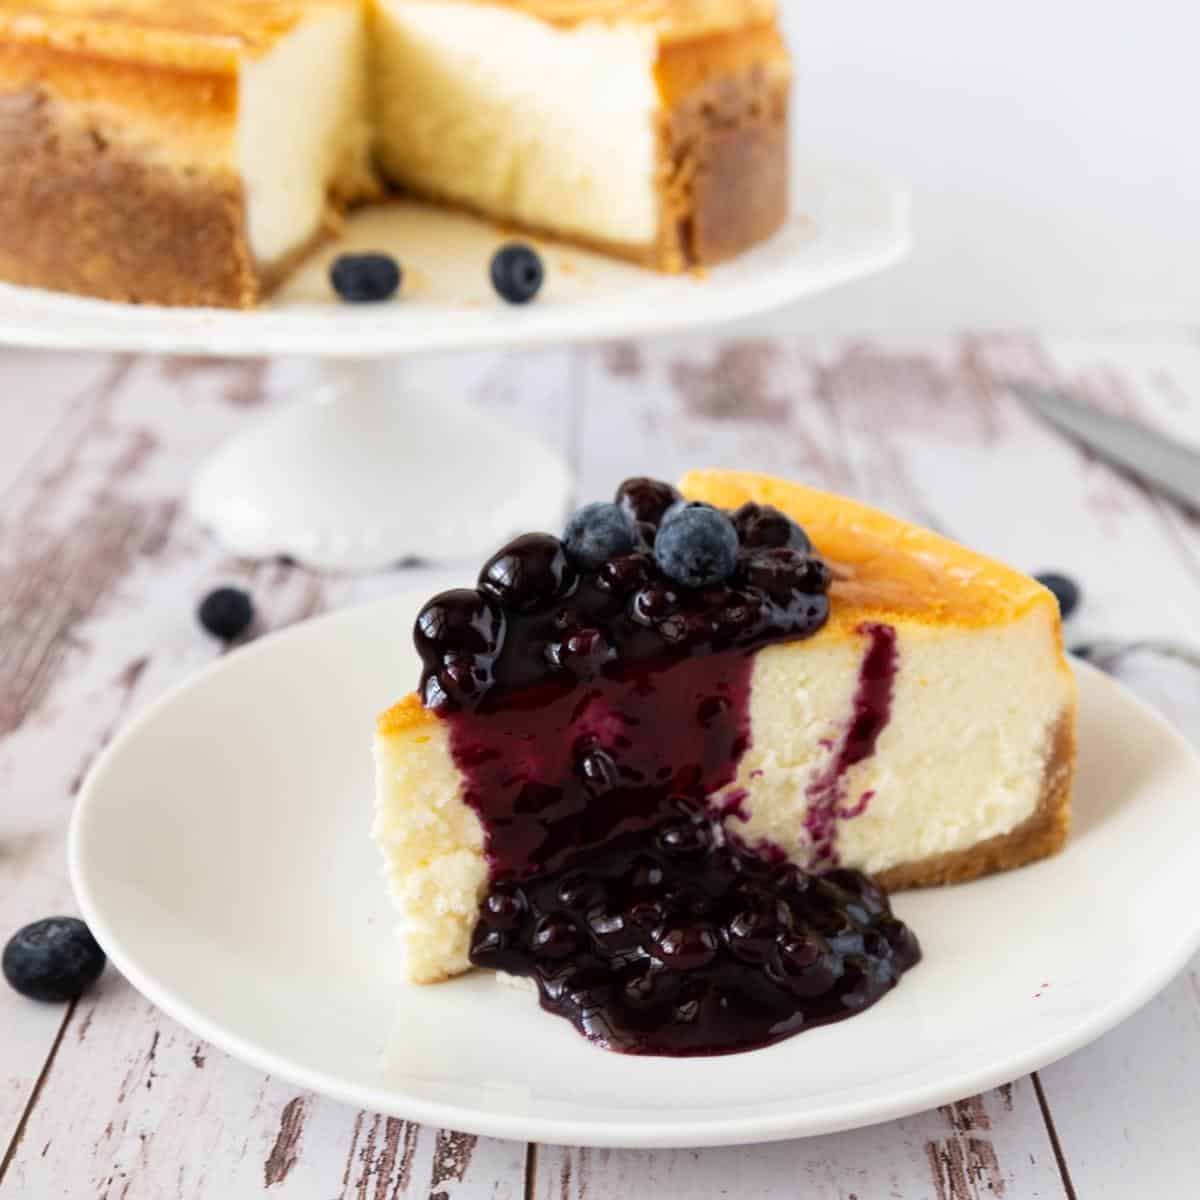 A slice of cheesecake with blueberry filling.